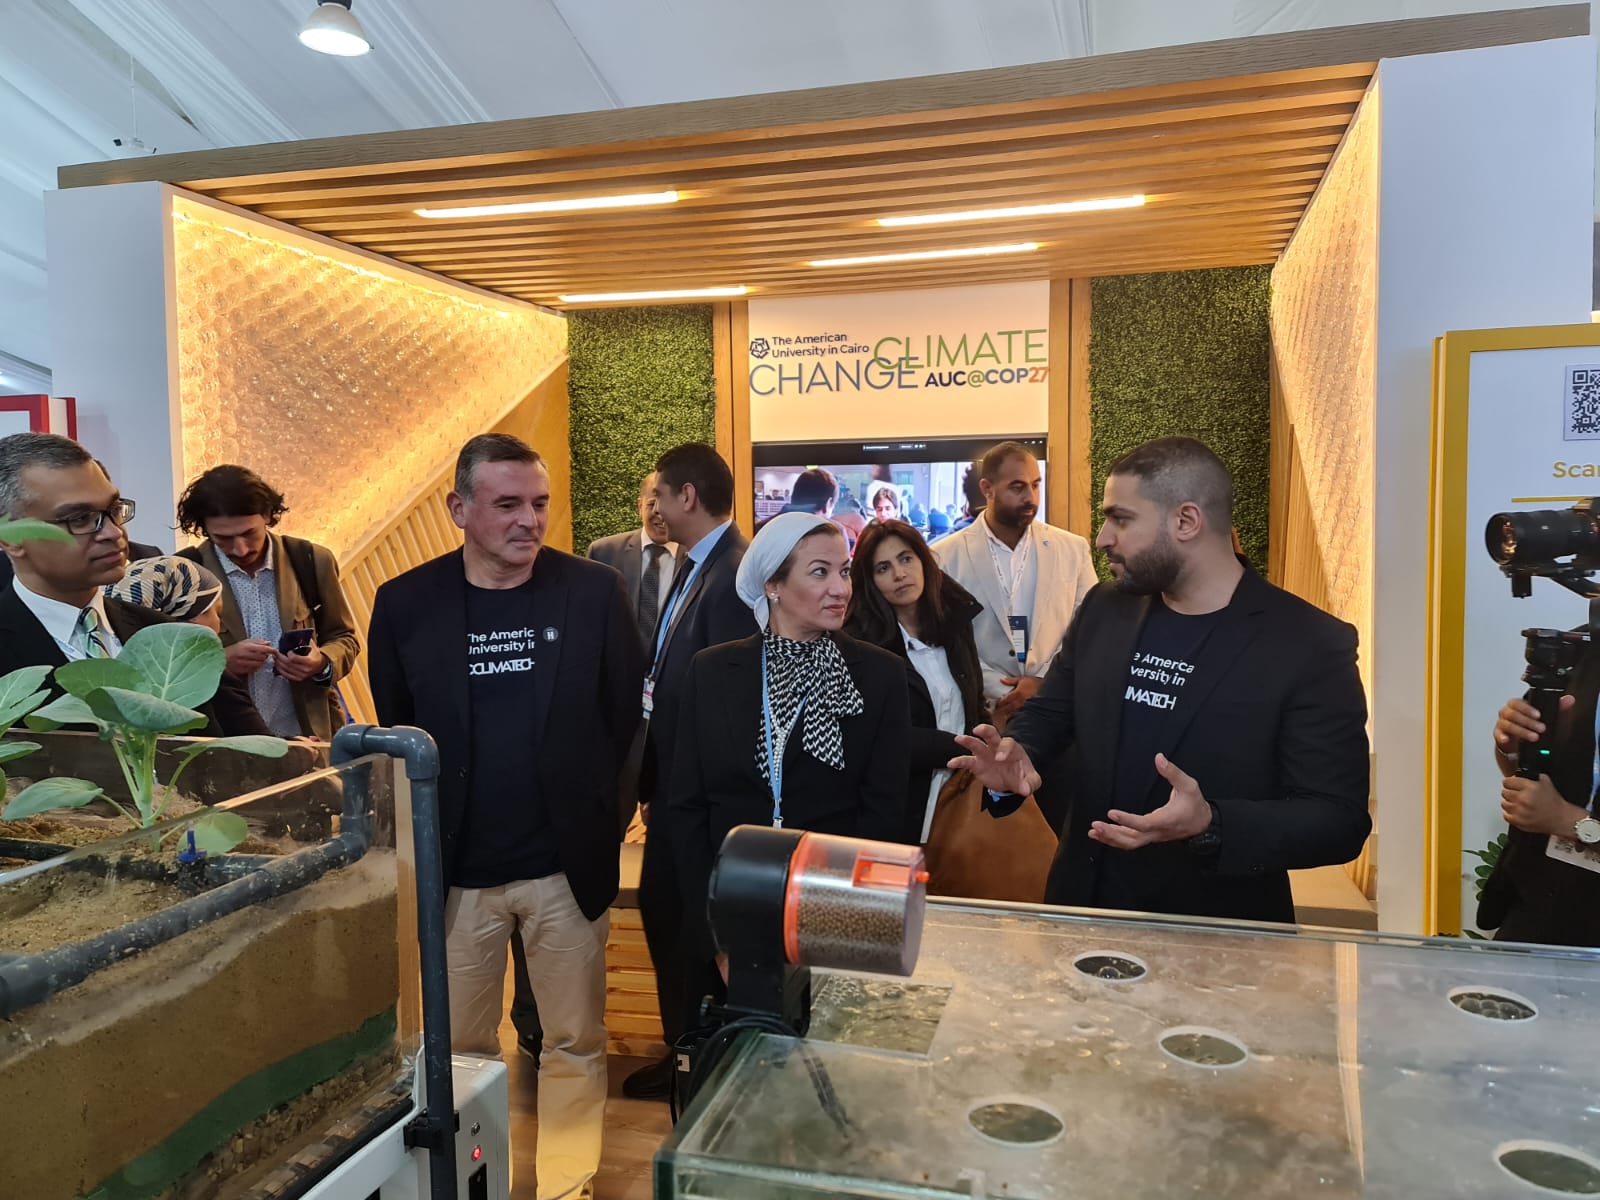 Minister of Environment visit to AUC Pavilion 